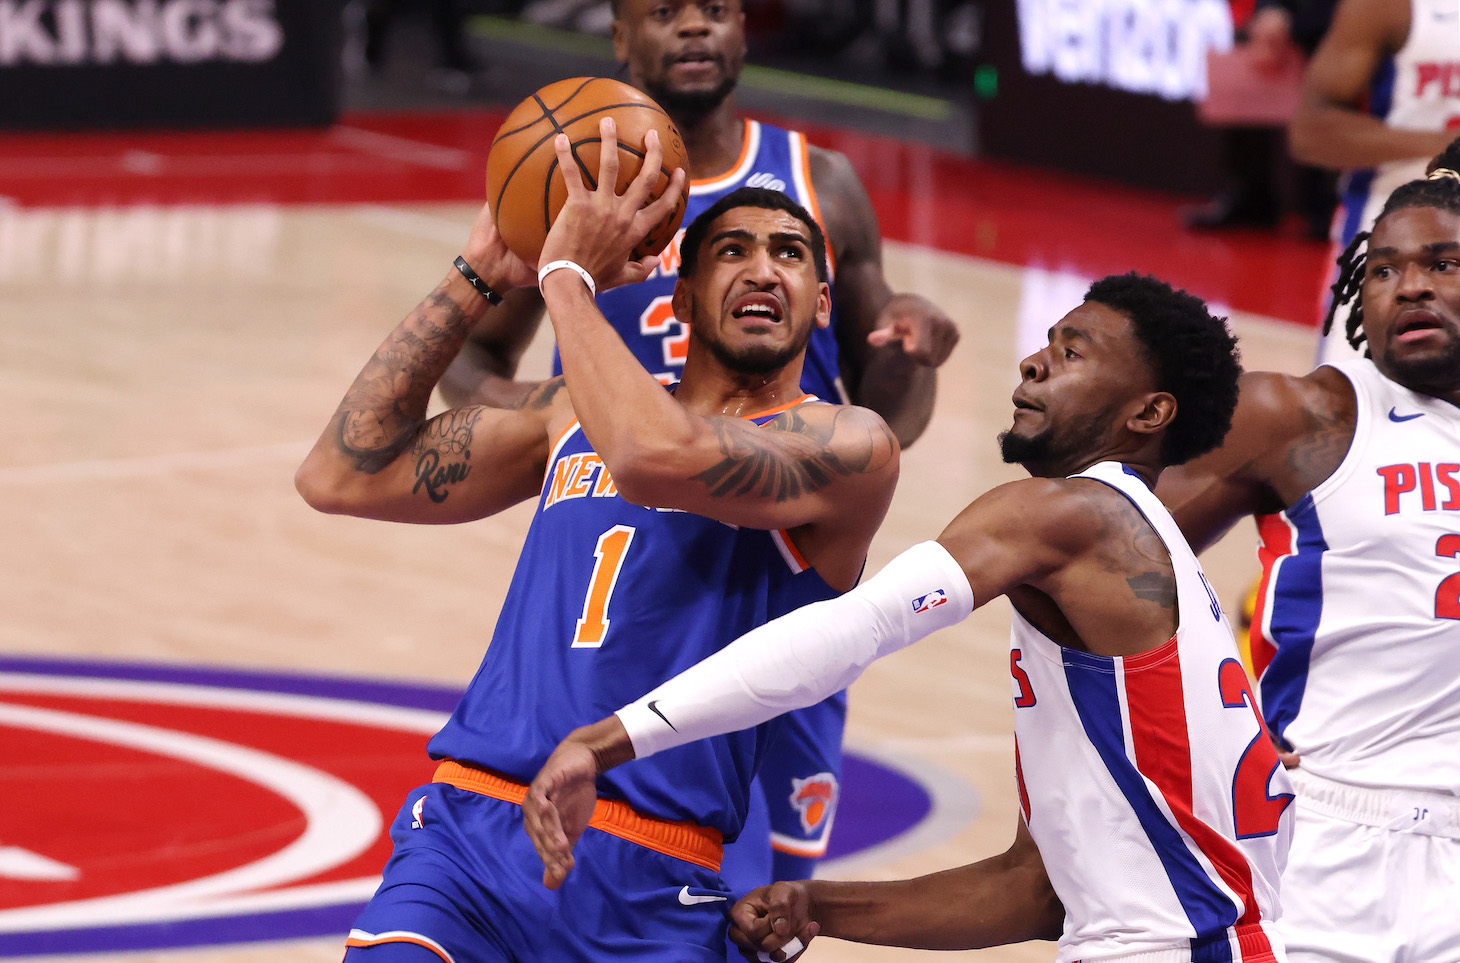 DETROIT, MICHIGAN - FEBRUARY 28: Obi Toppin #1 of the New York Knicks drives to the basket against Josh Jackson #20 of the Detroit Pistons during the first half at Little Caesars Arena on February 28, 2021 in Detroit, Michigan. NOTE TO USER: User expressly acknowledges and agrees that, by downloading and or using this photograph, User is consenting to the terms and conditions of the Getty Images License Agreement. (Photo by Gregory Shamus/Getty Images)